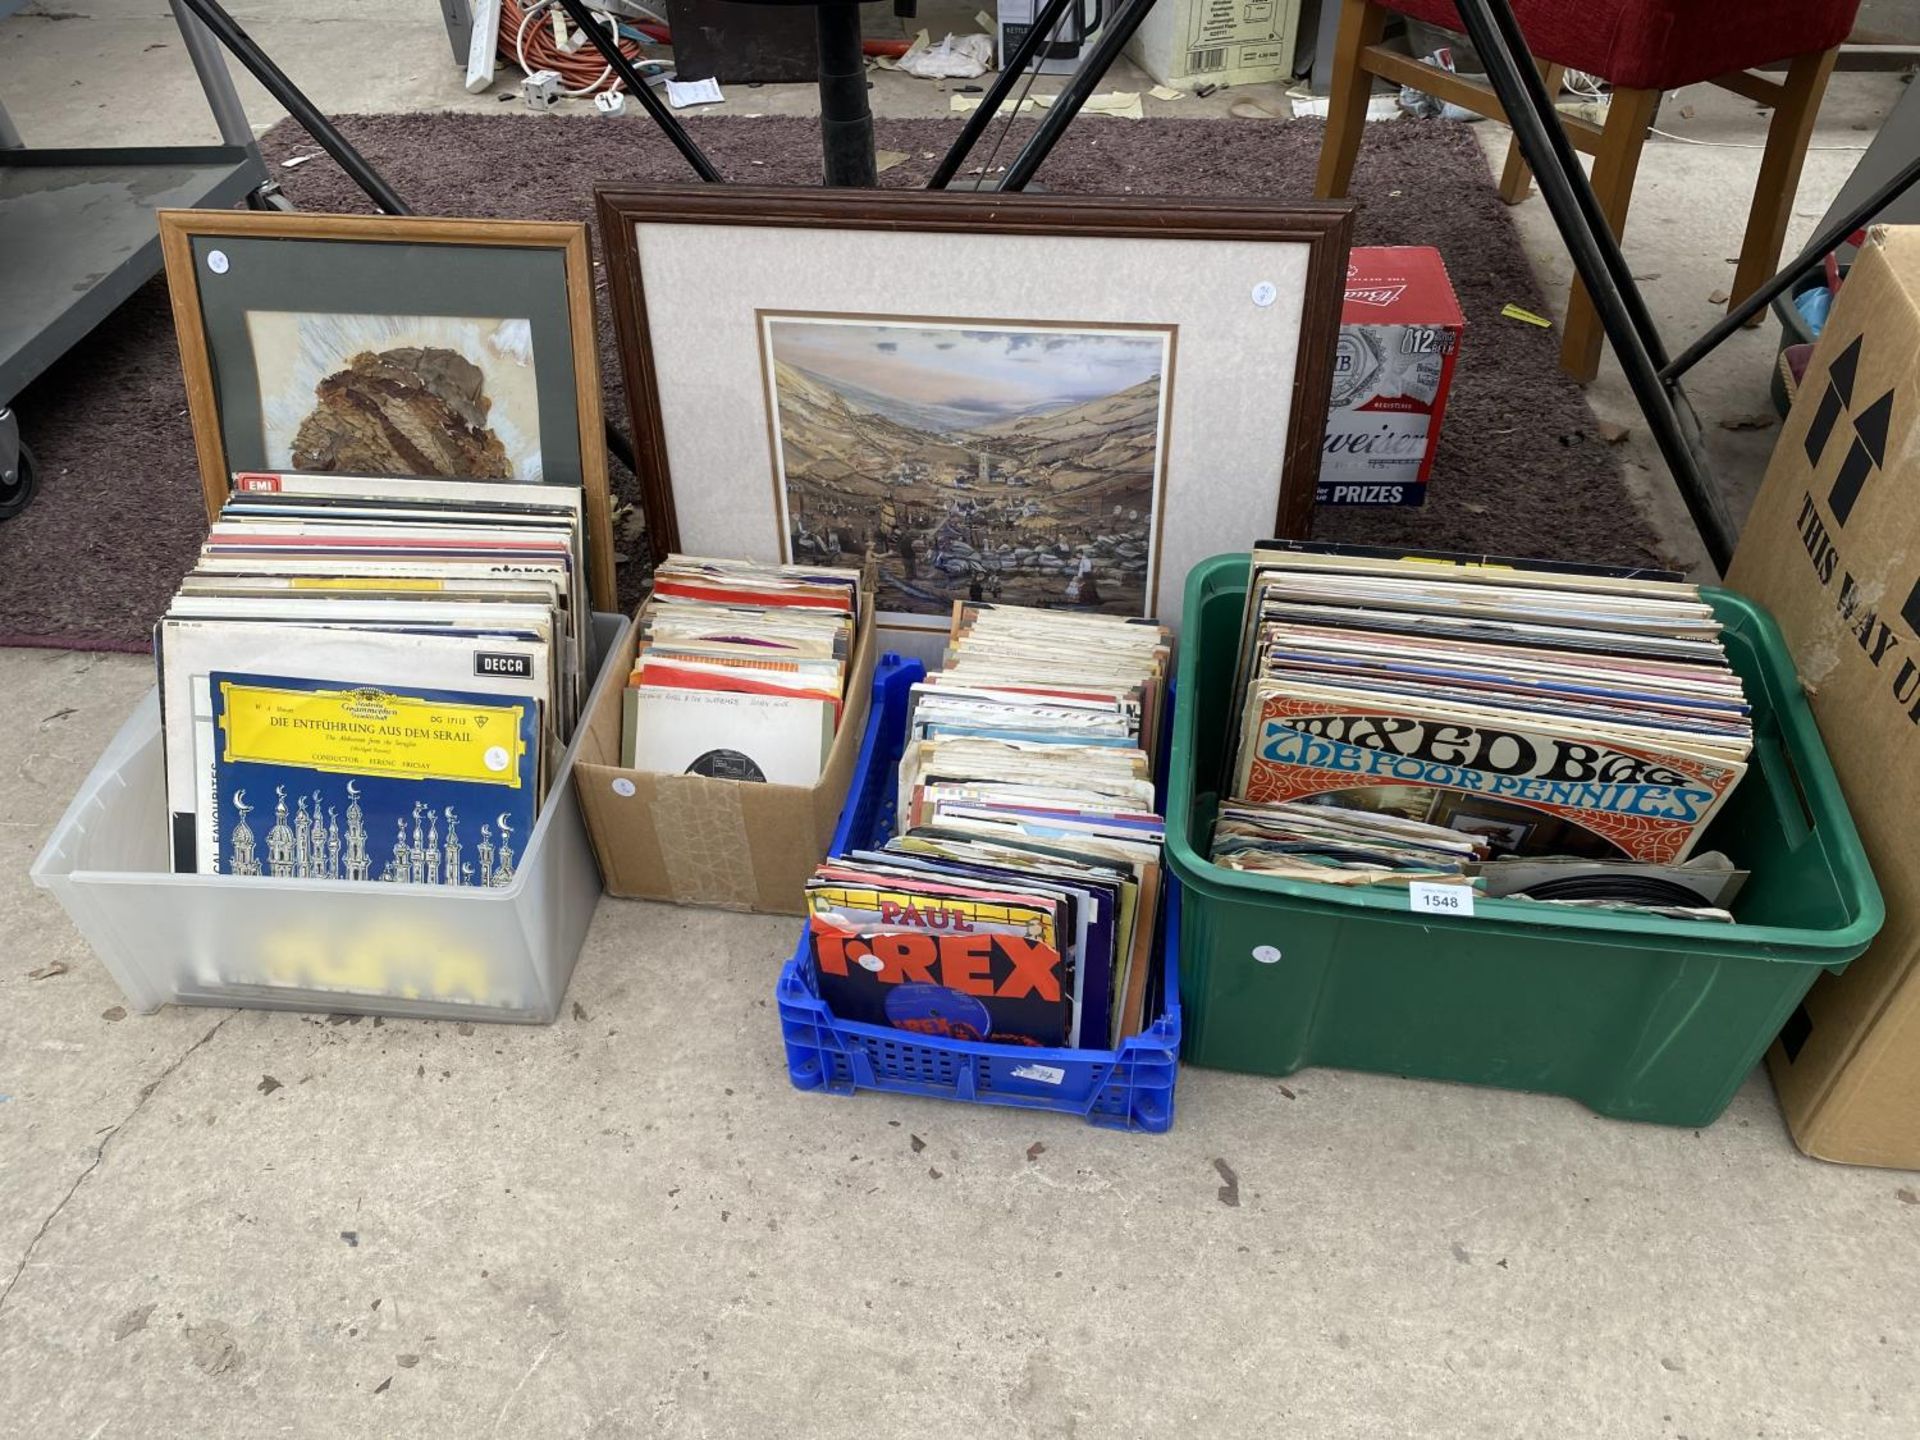 A LARGE QUANTITY OF VINTAGE LP RECORDS AND TWO FRAMED PRINTS